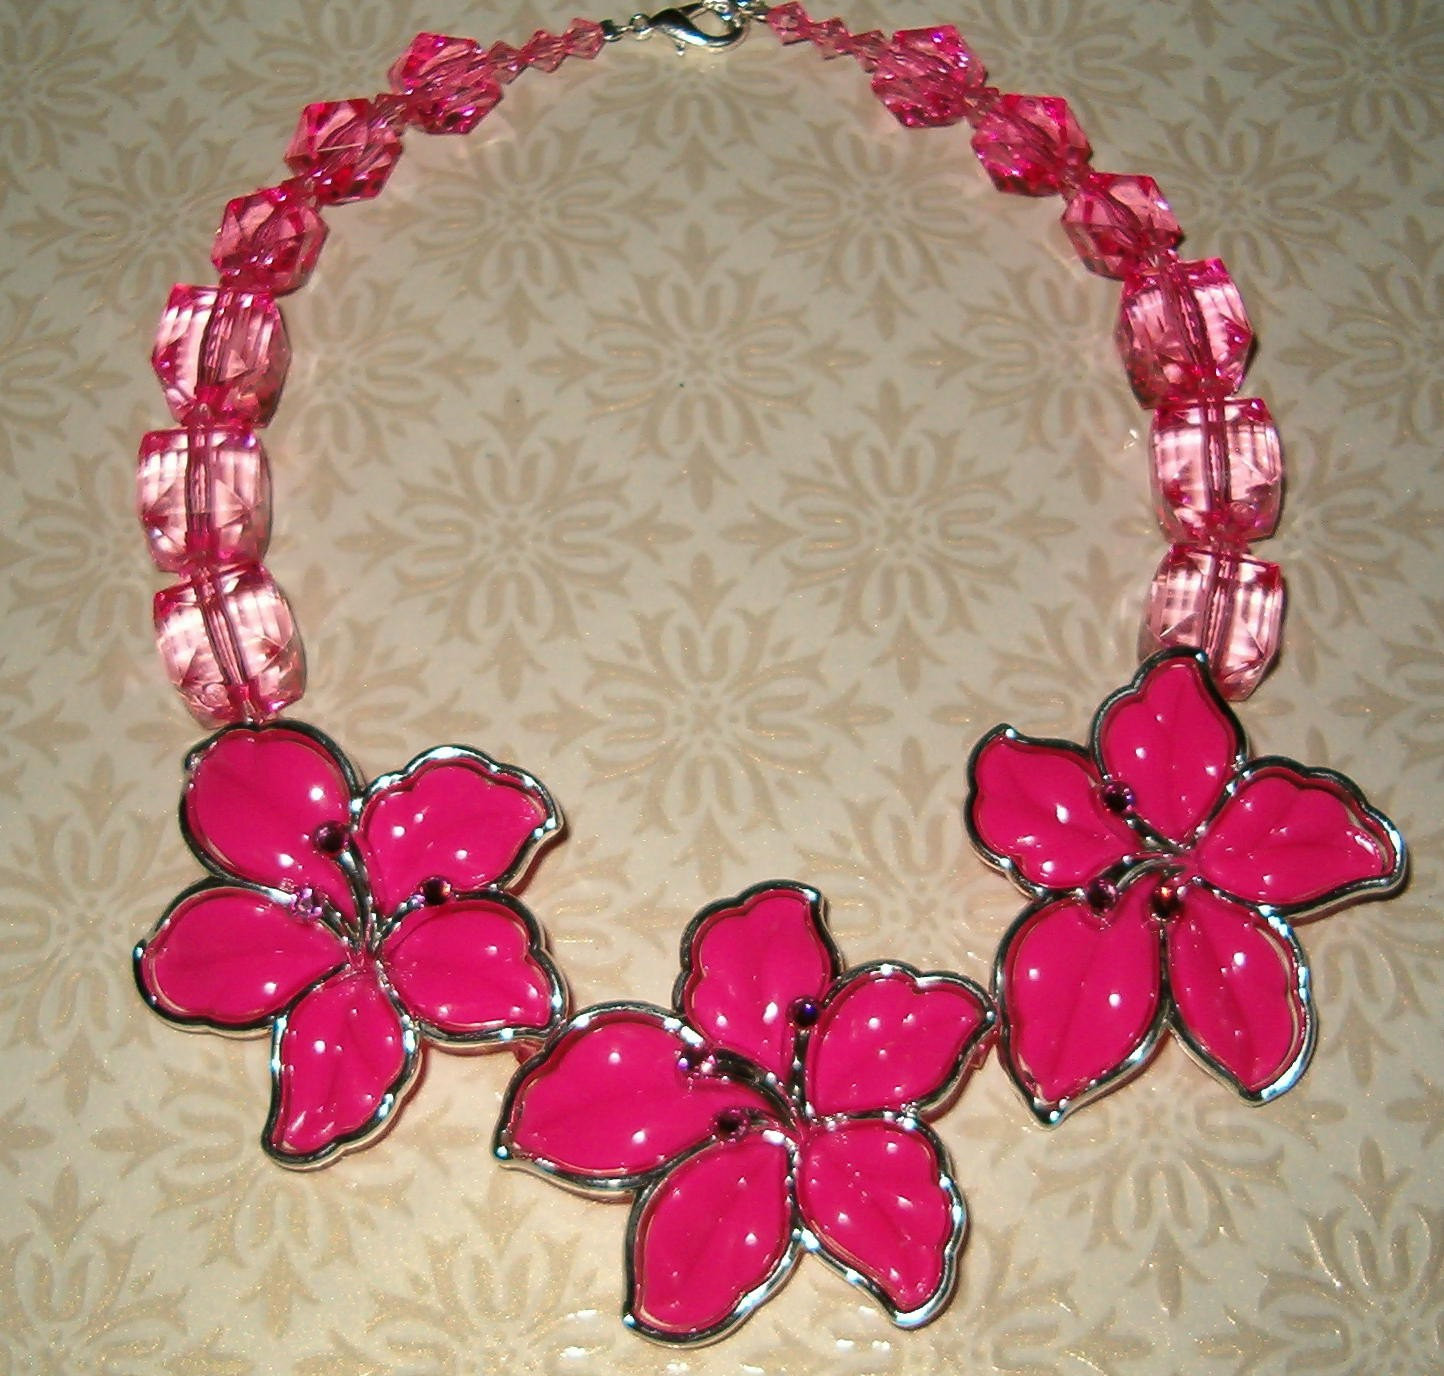 Hawaiian Flower Necklace
 Pink Hawaiian Flower Trio Necklace by kathyskreations1 on Etsy